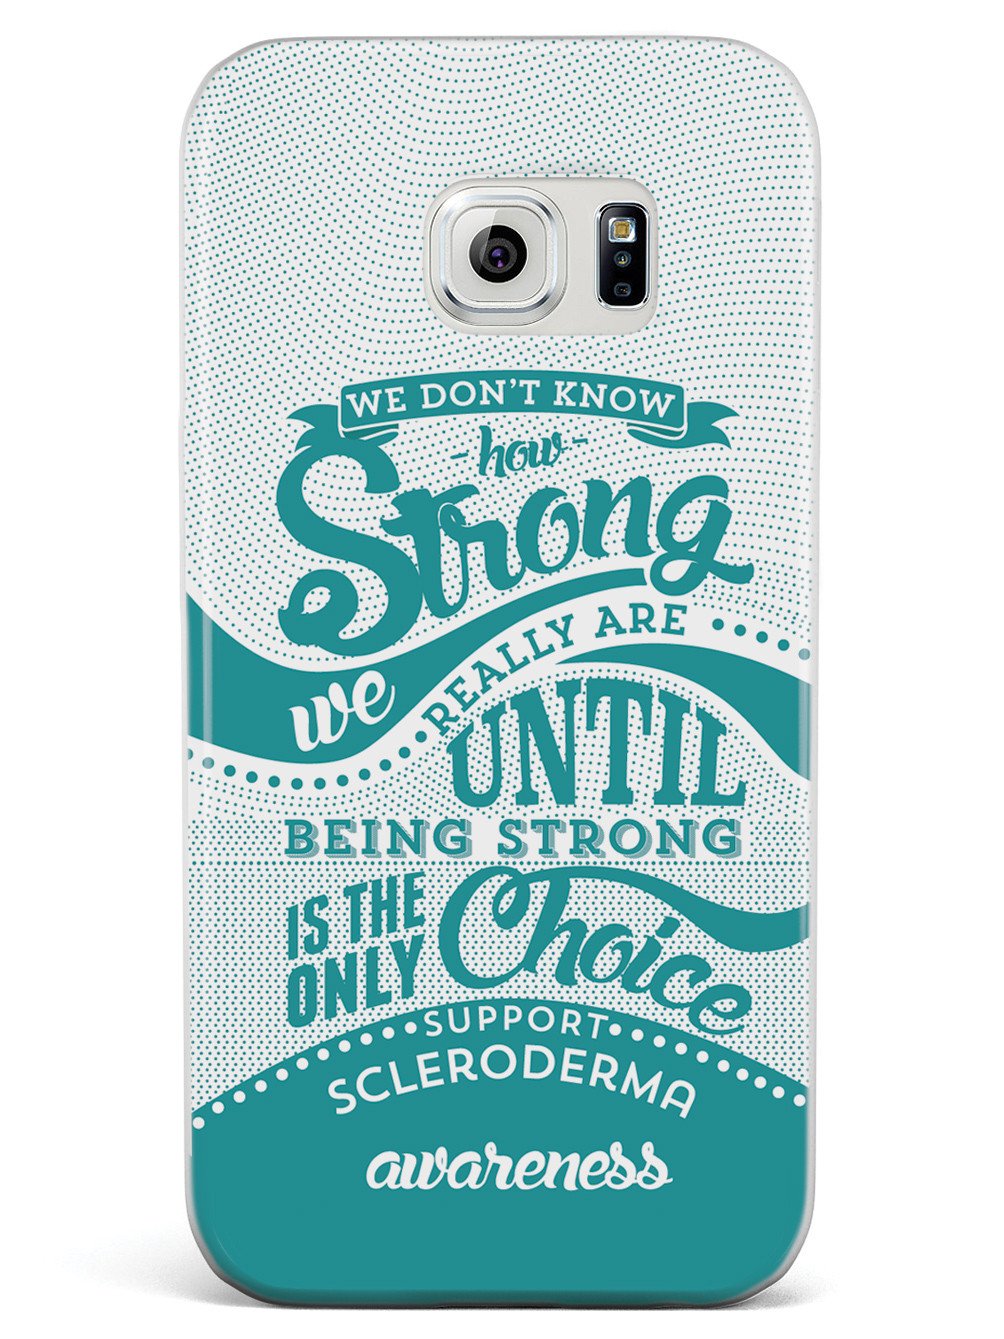 Scleroderma Awareness - How Strong Case